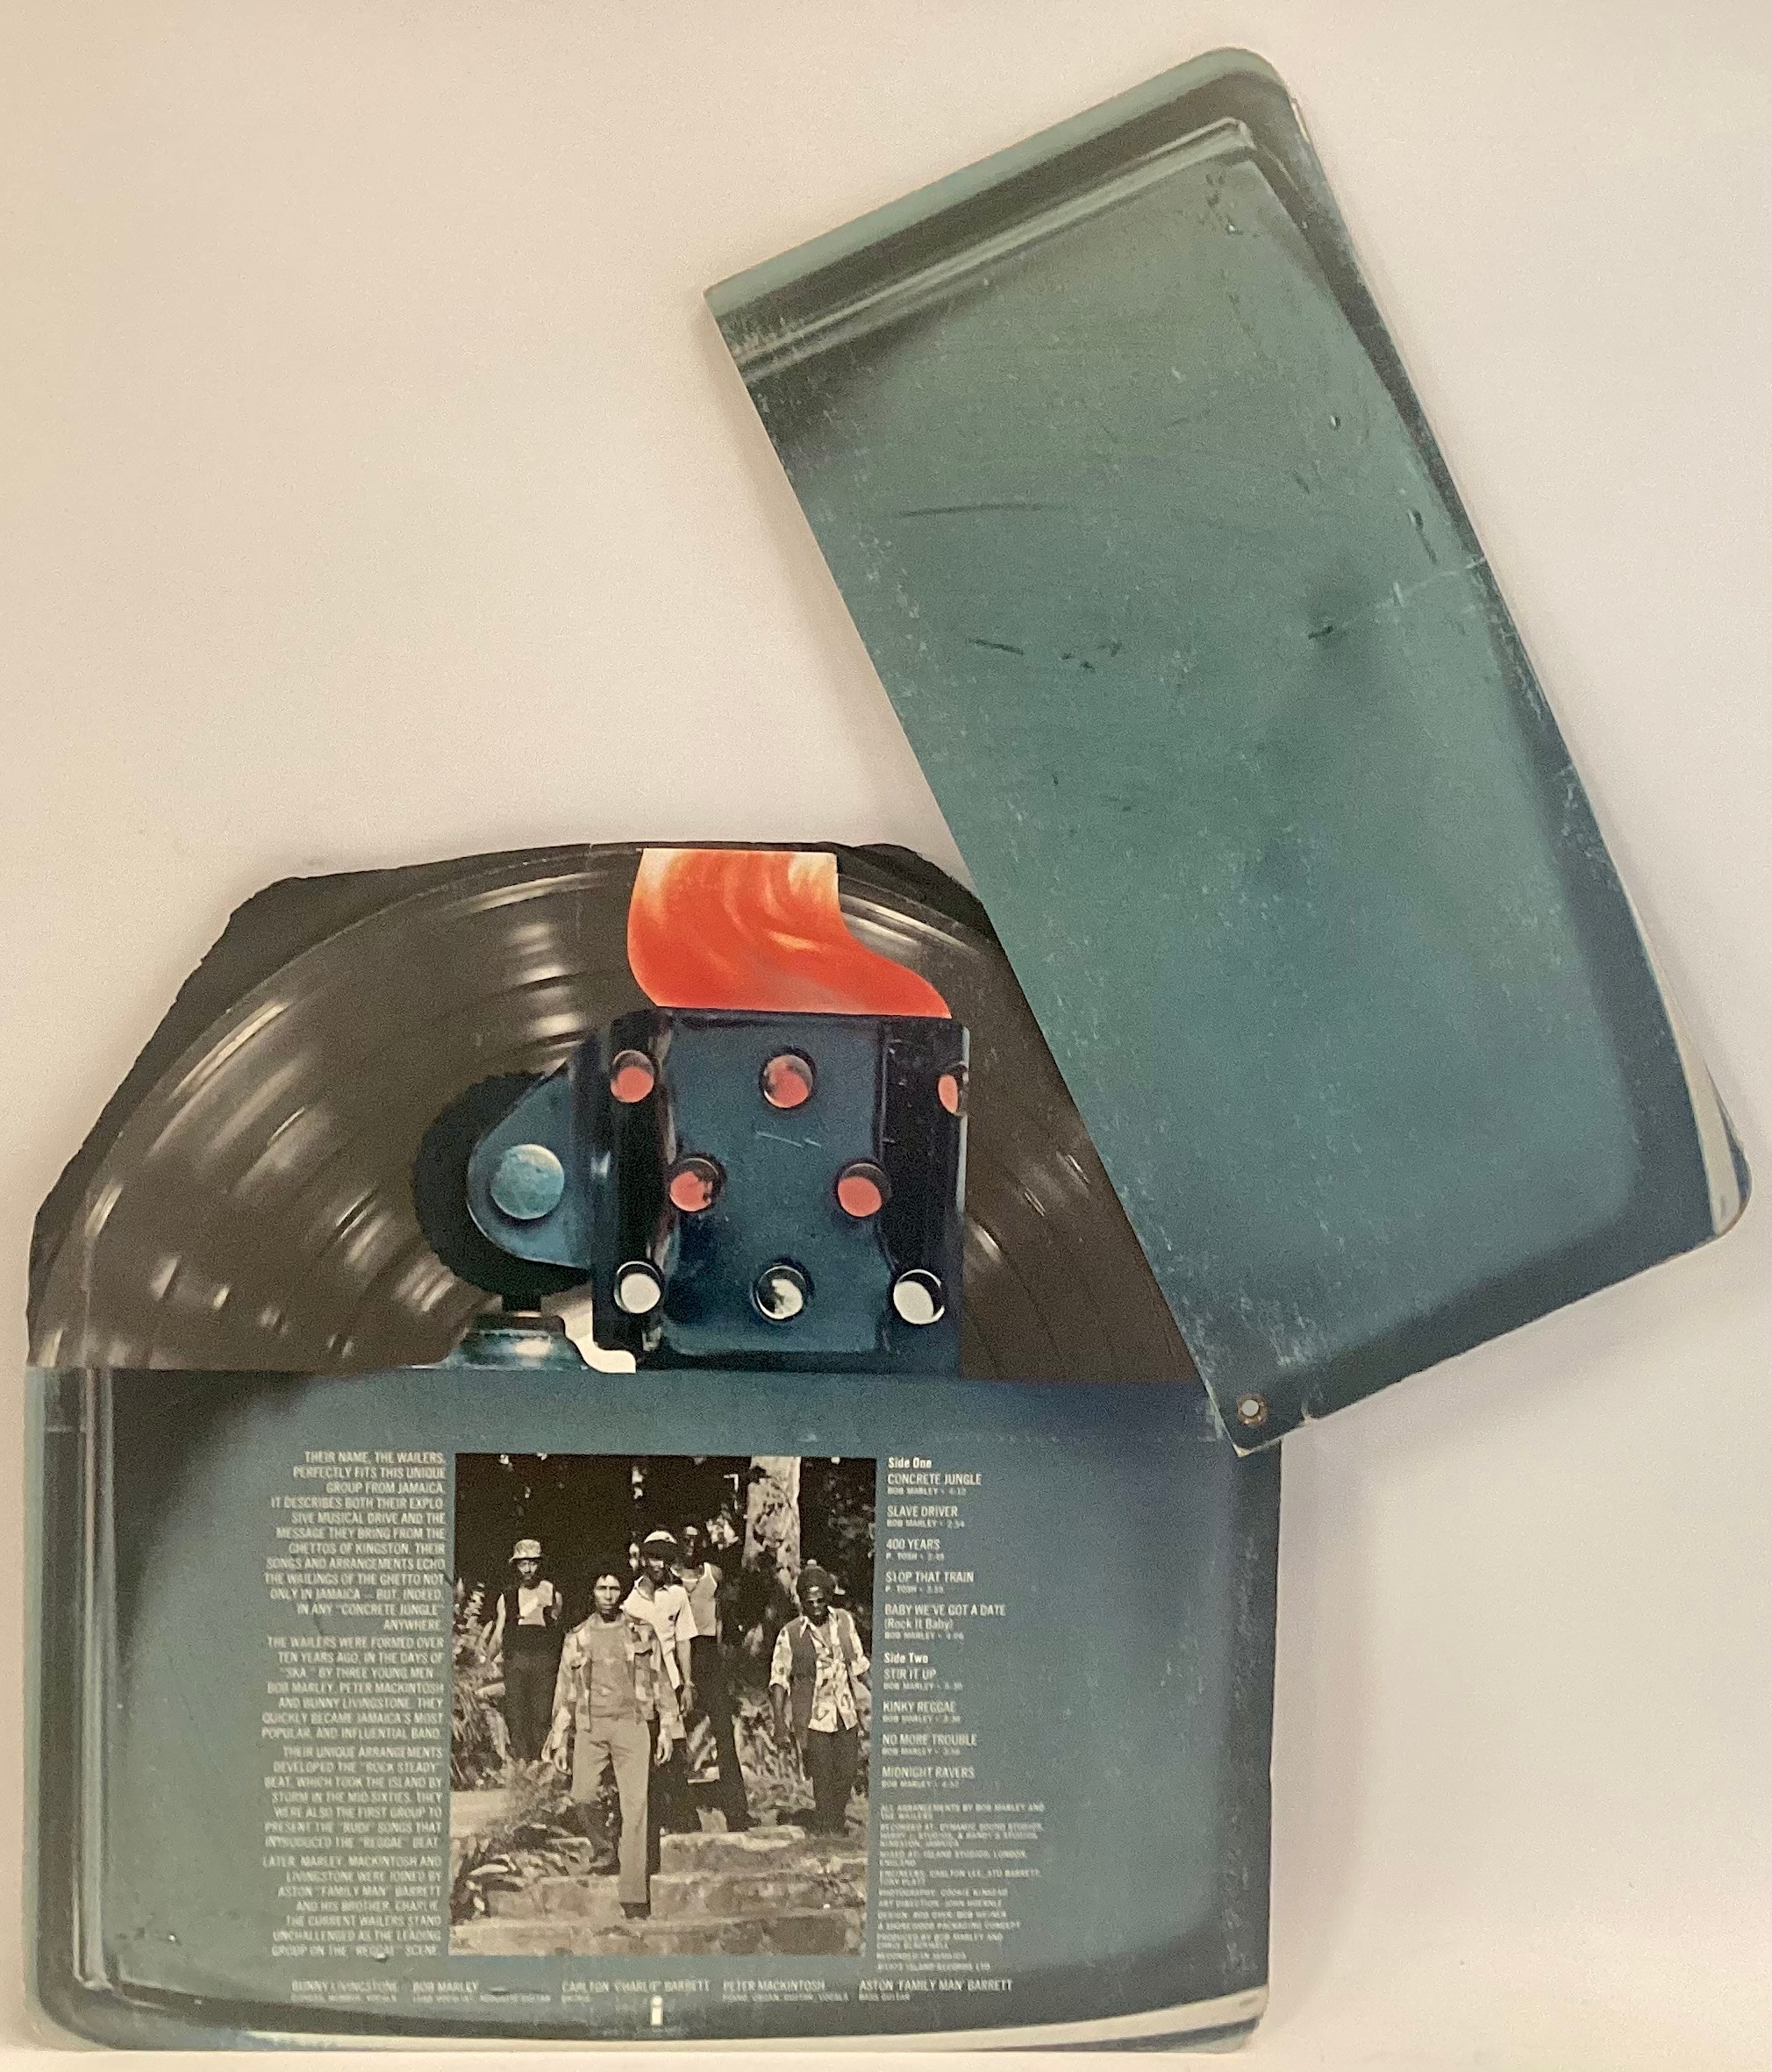 BOB MARLEY AND THE WAILERS LP ‘CATCH A FIRE’ IN RARE ZIPPO LIGHTER SLEEVE. From 1973 on Island - Image 4 of 6